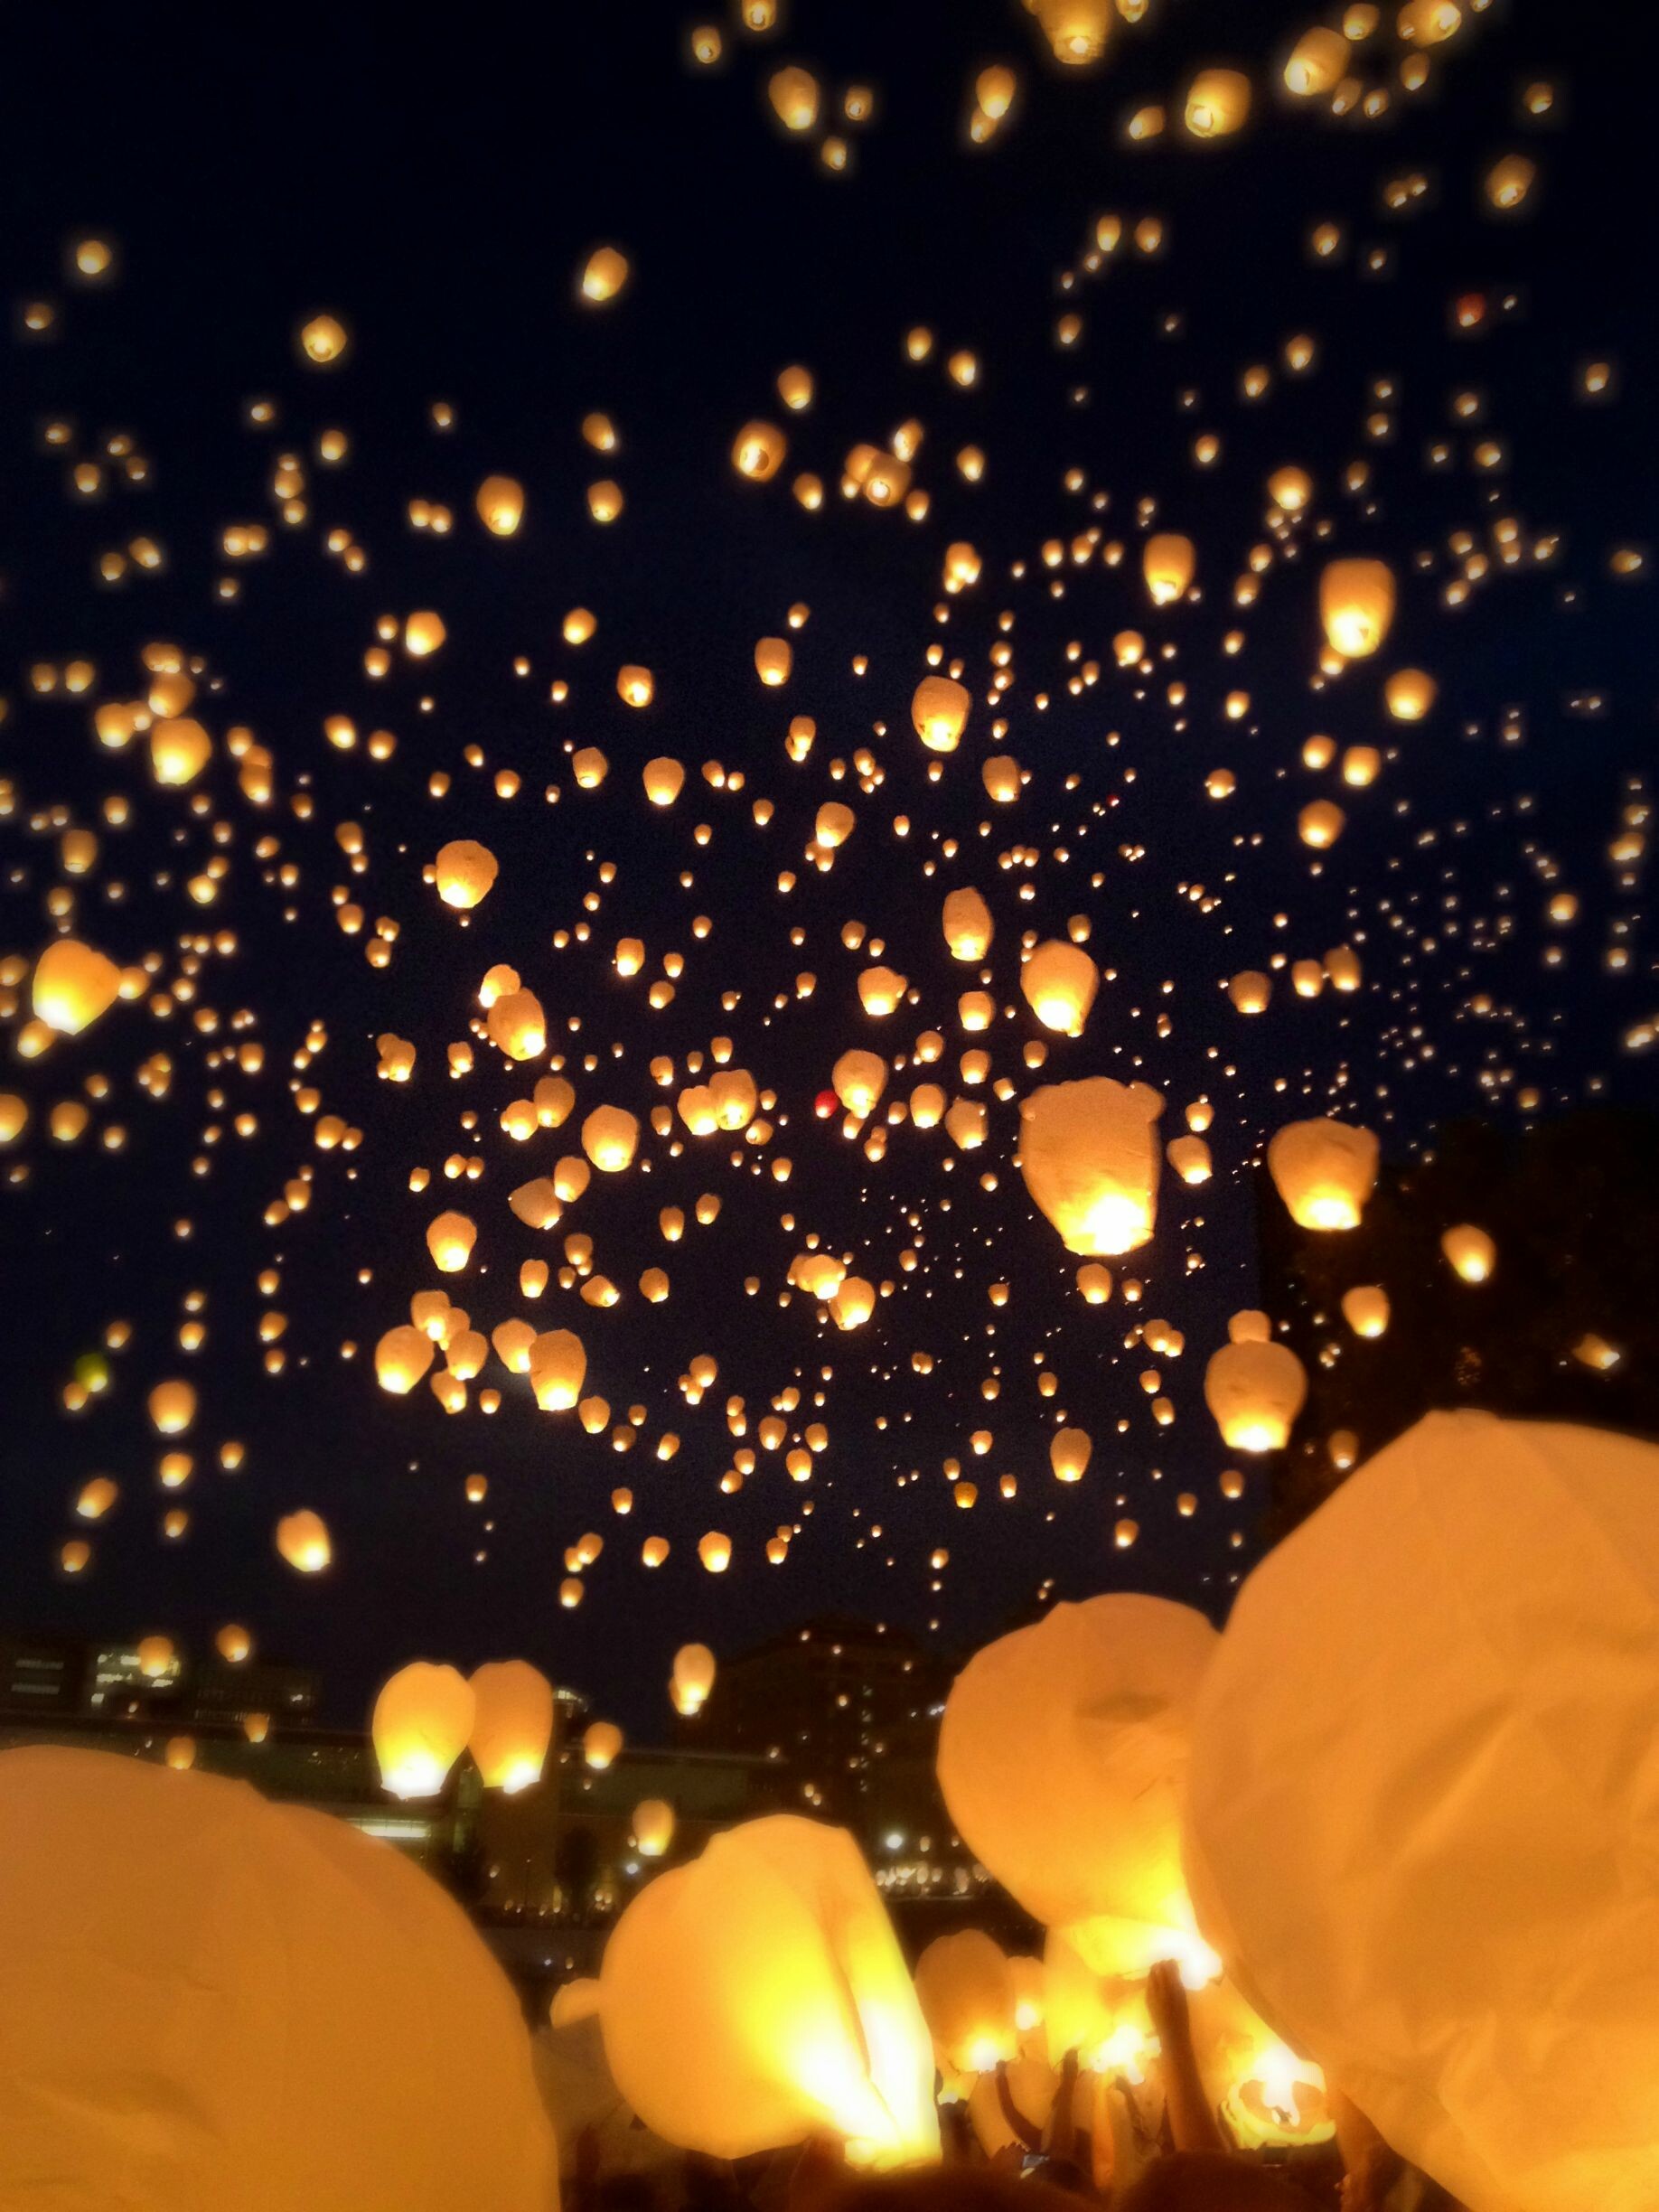 Lantern Festival: Holiday celebrated in China and other Asian countries that honors deceased ancestors. 1840x2450 HD Wallpaper.